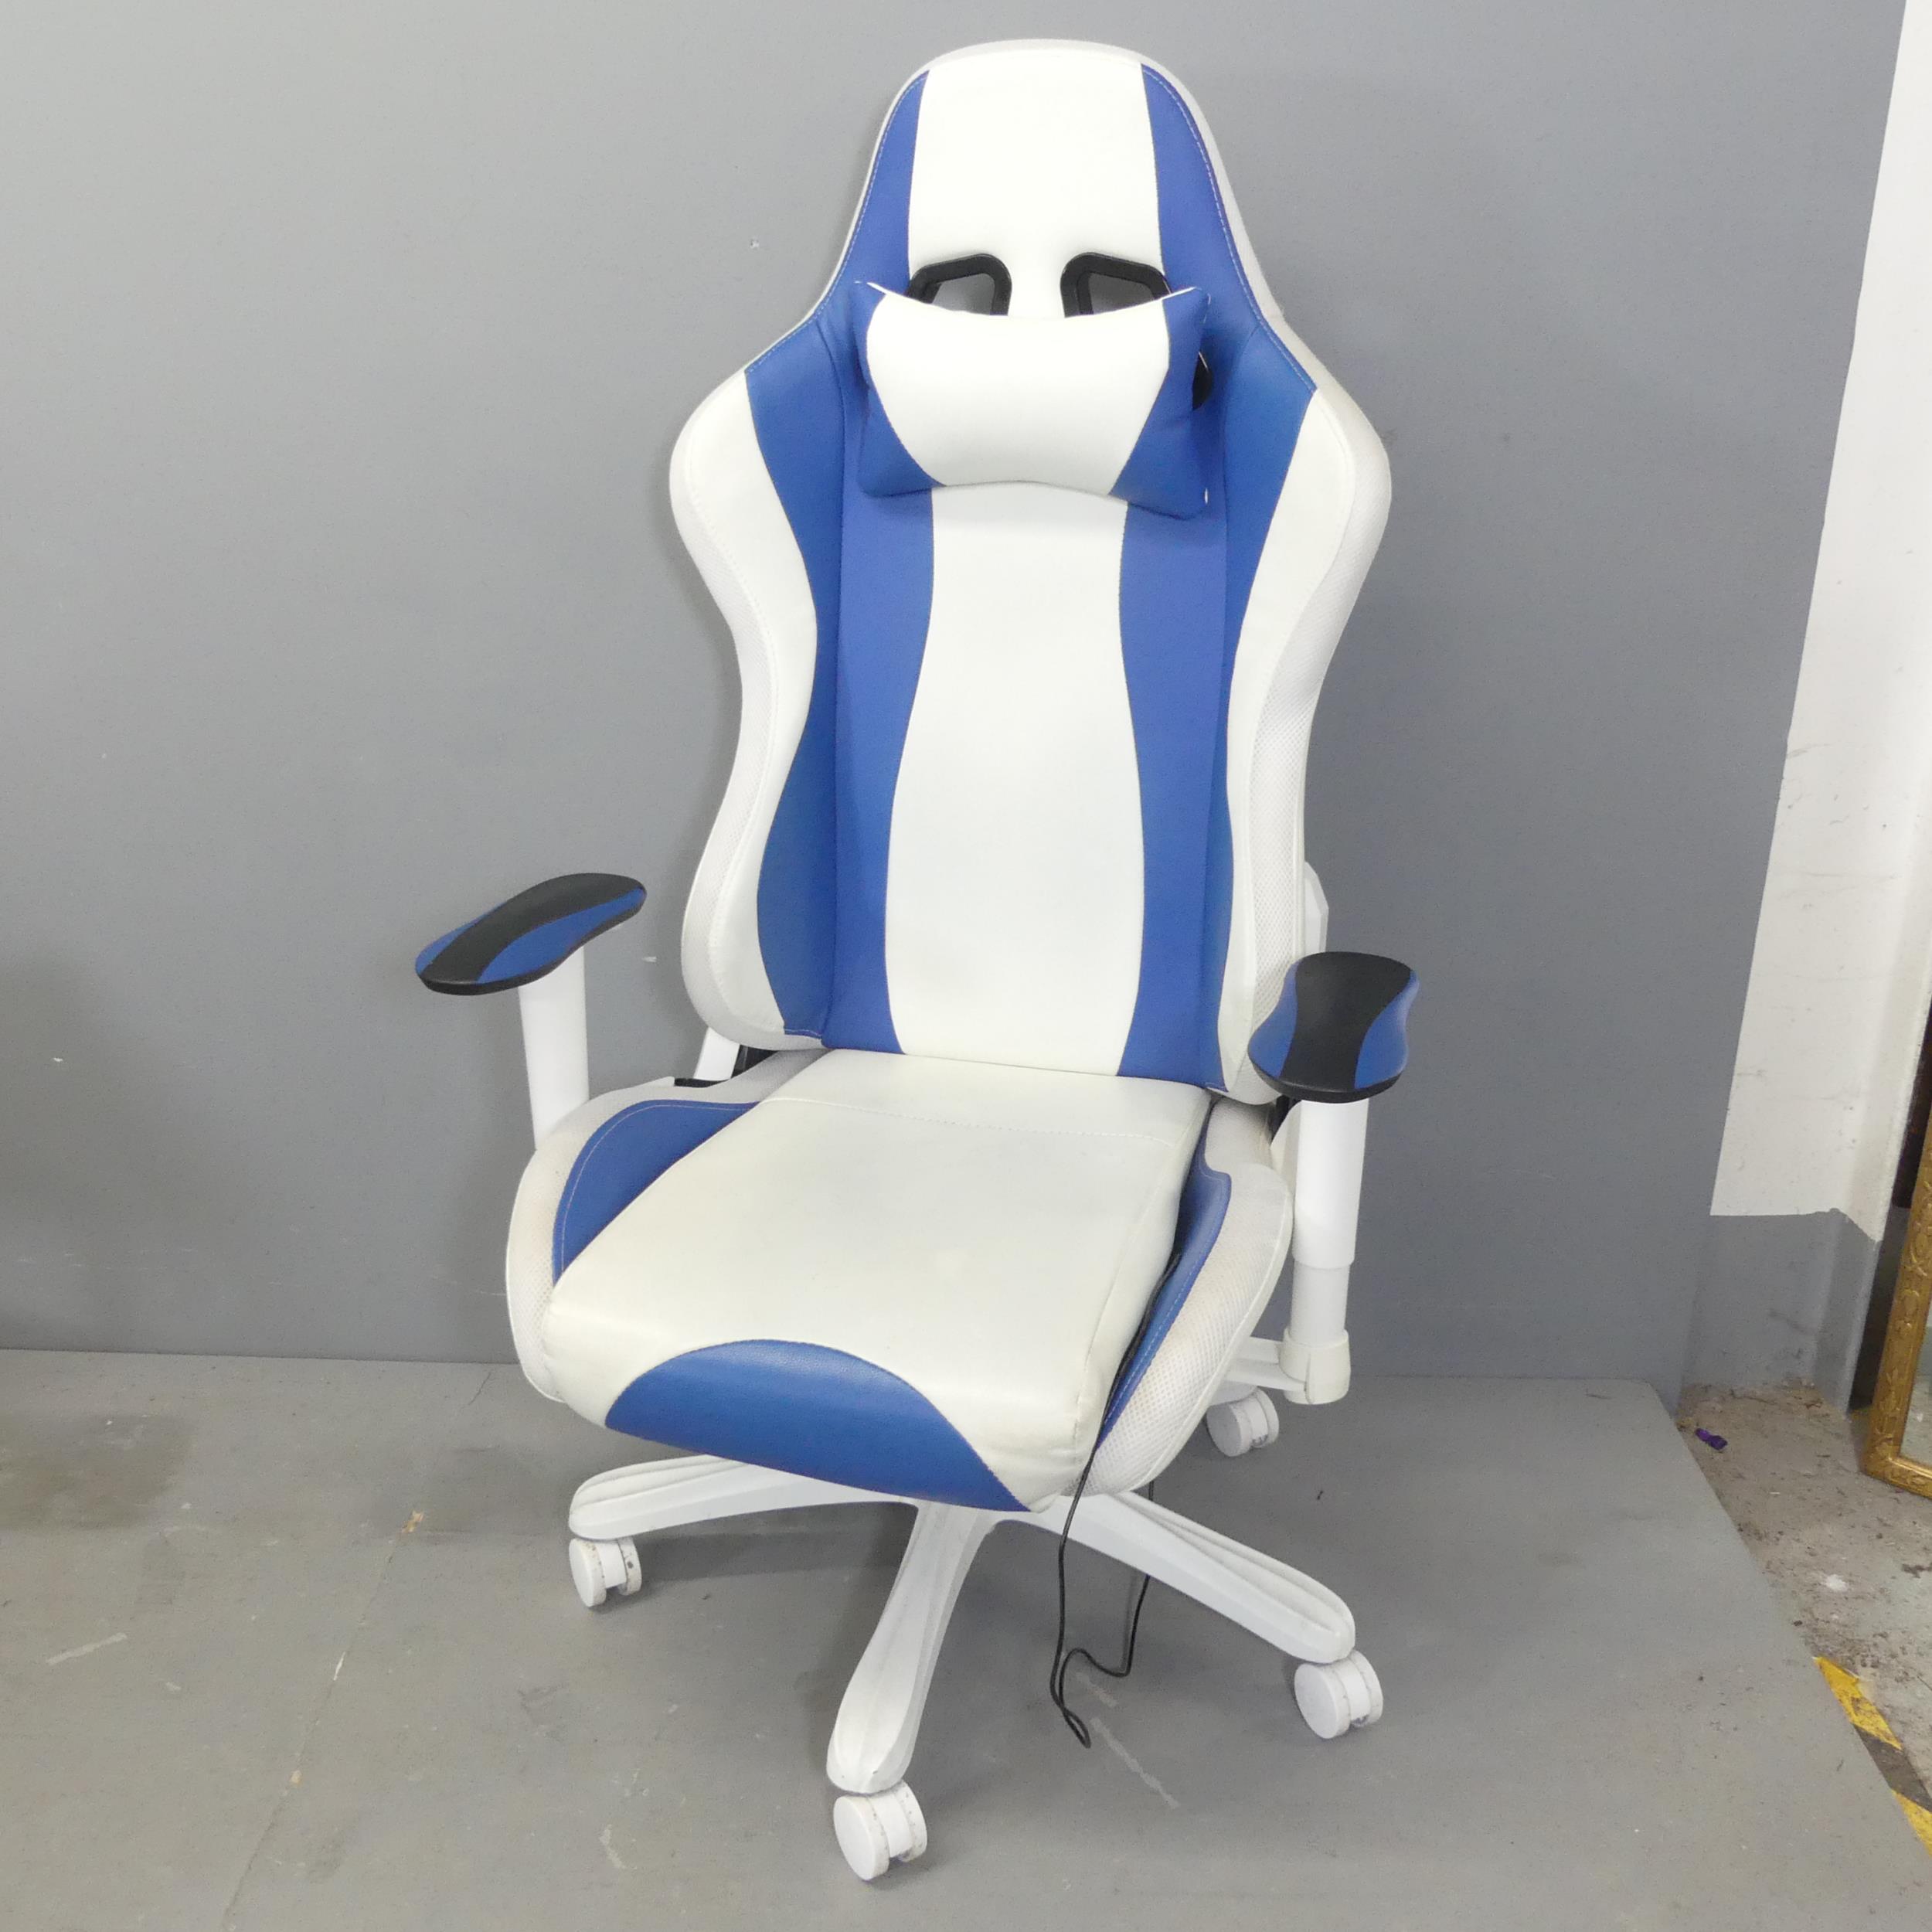 A contemporary gaming chair, with LED lighting and swivel and rise and fall mechanisms. Some marks